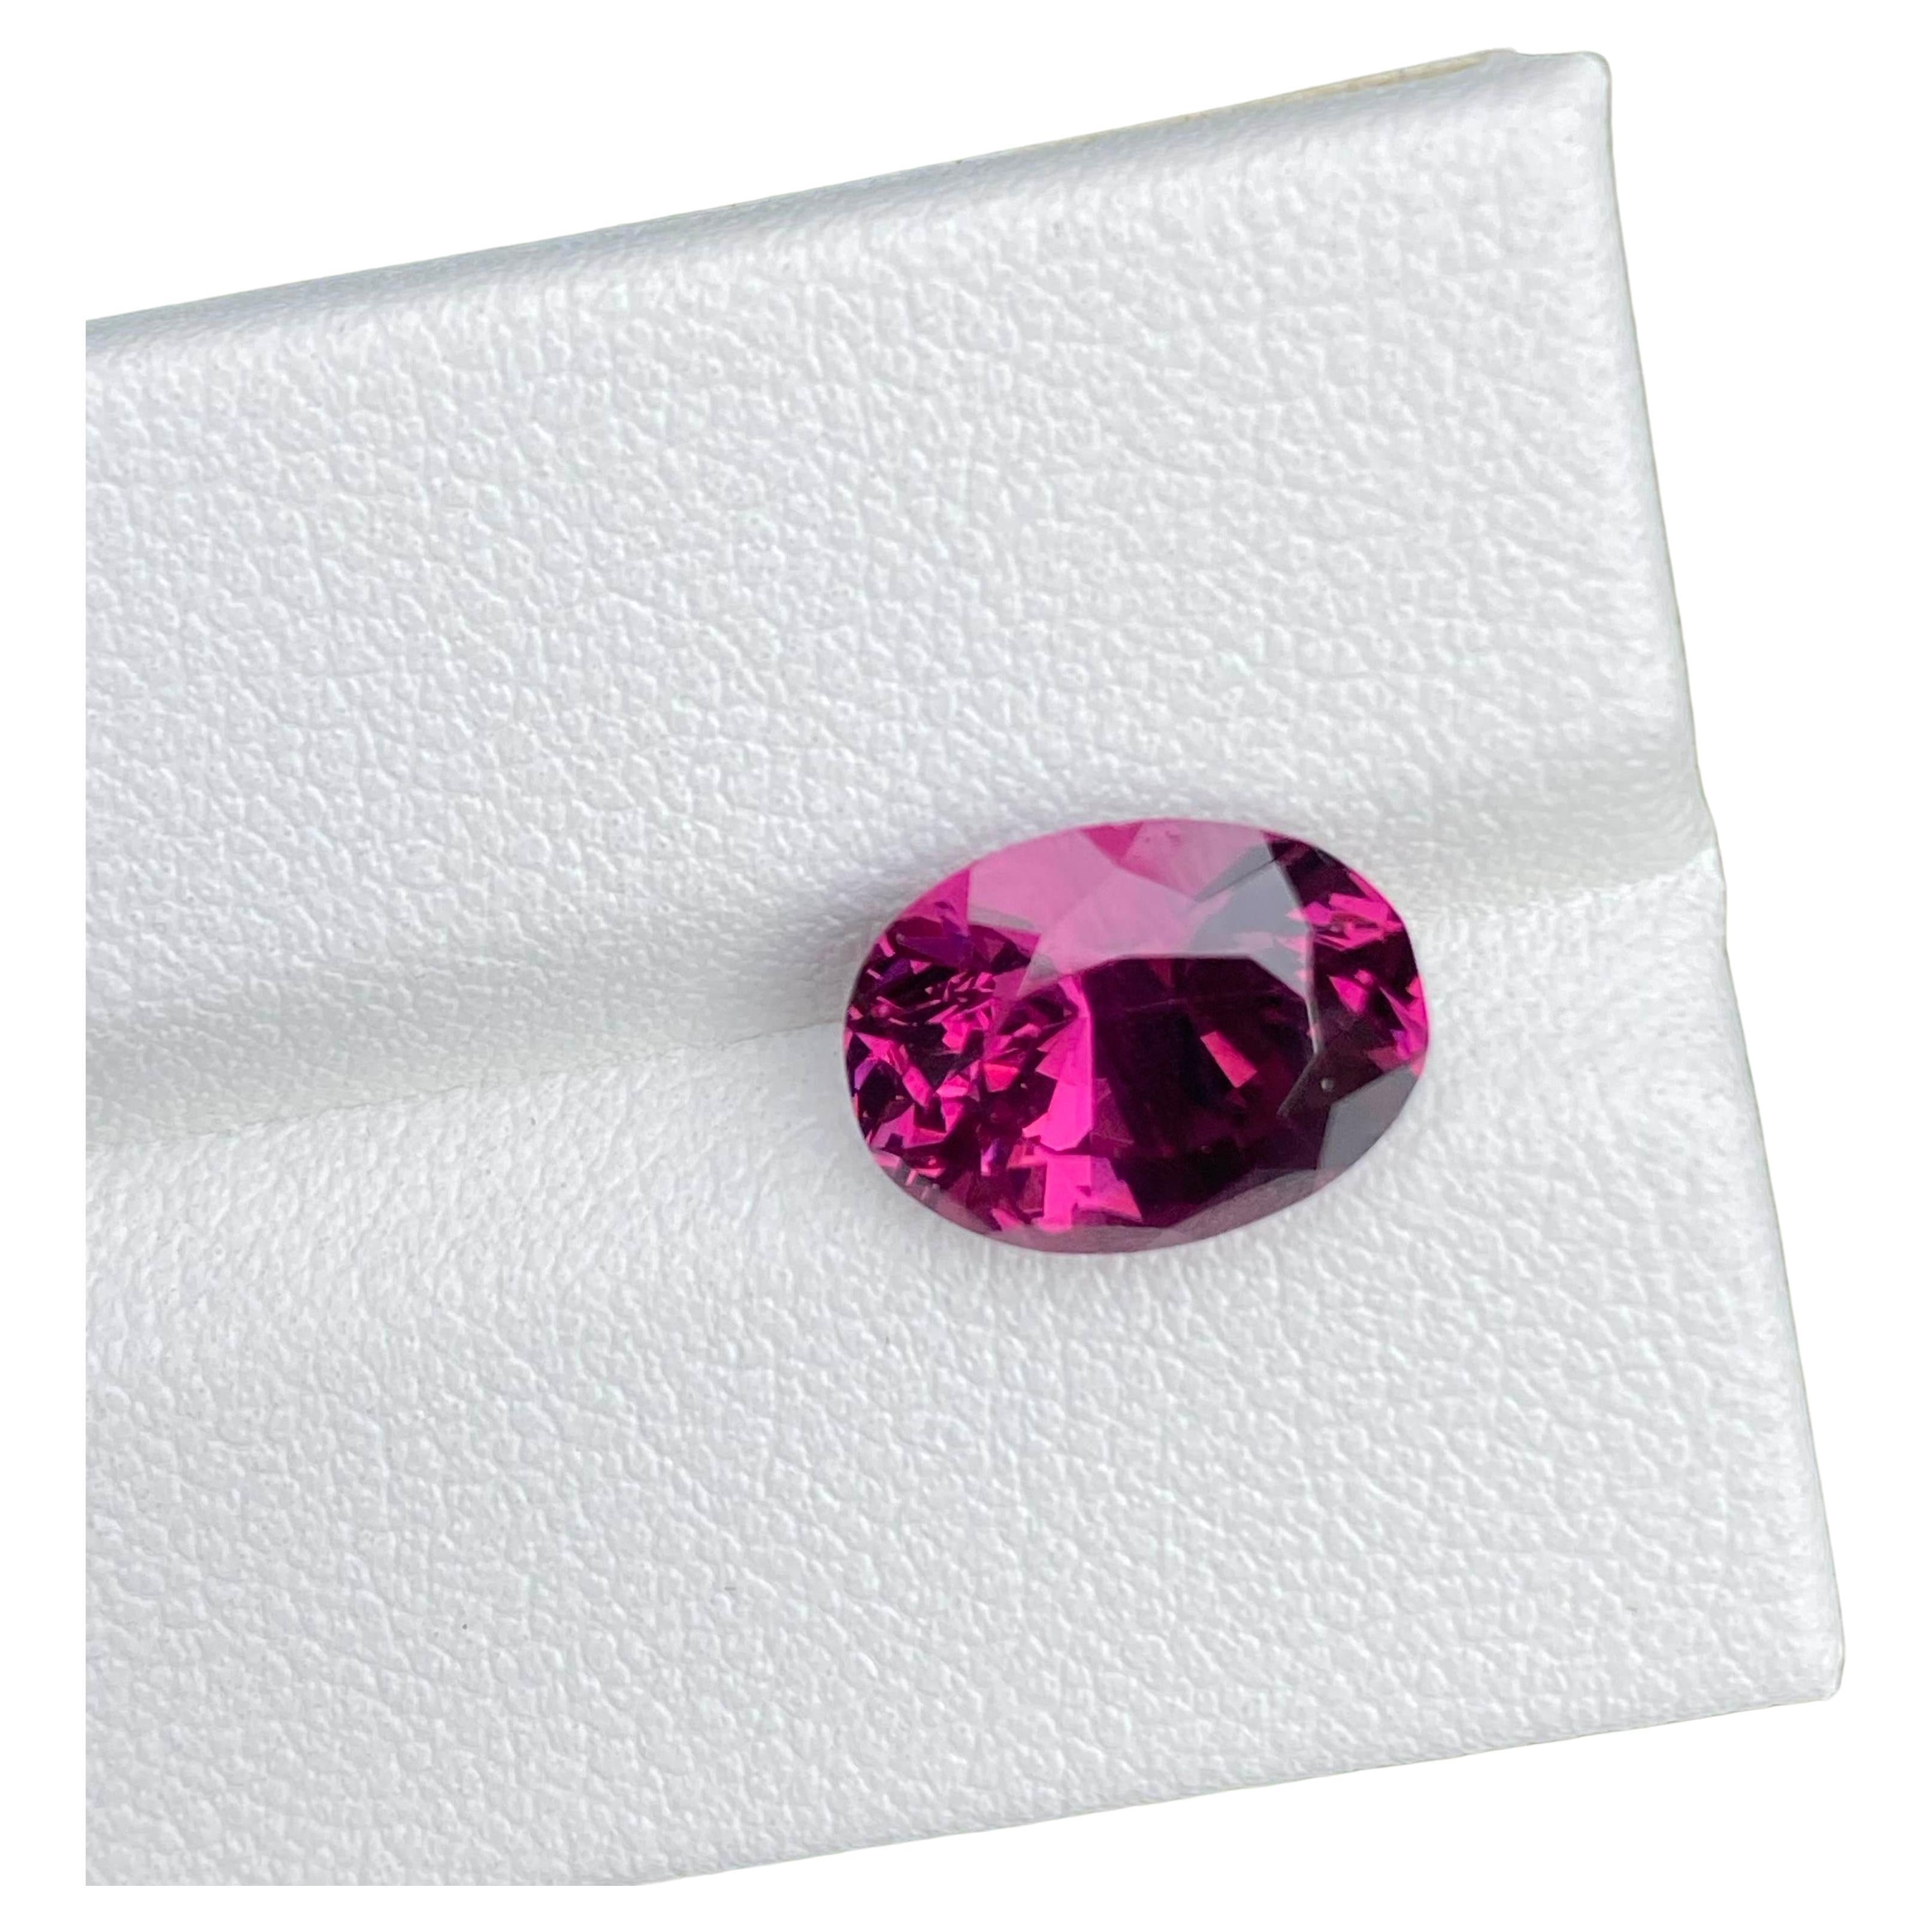 Natural Pink Garnet 4.25 Carats, come with a pretty Pink color and luster and perfect cut, unheated 

• Variety: Garnet
• Origin: Sri Lanka (Ceylon)
• Color(s): Pink
• Shape/Cutting Style: oval
• Dimensions: 11.1mm x 14mm x 7.8mm
• Calibrated: No
•